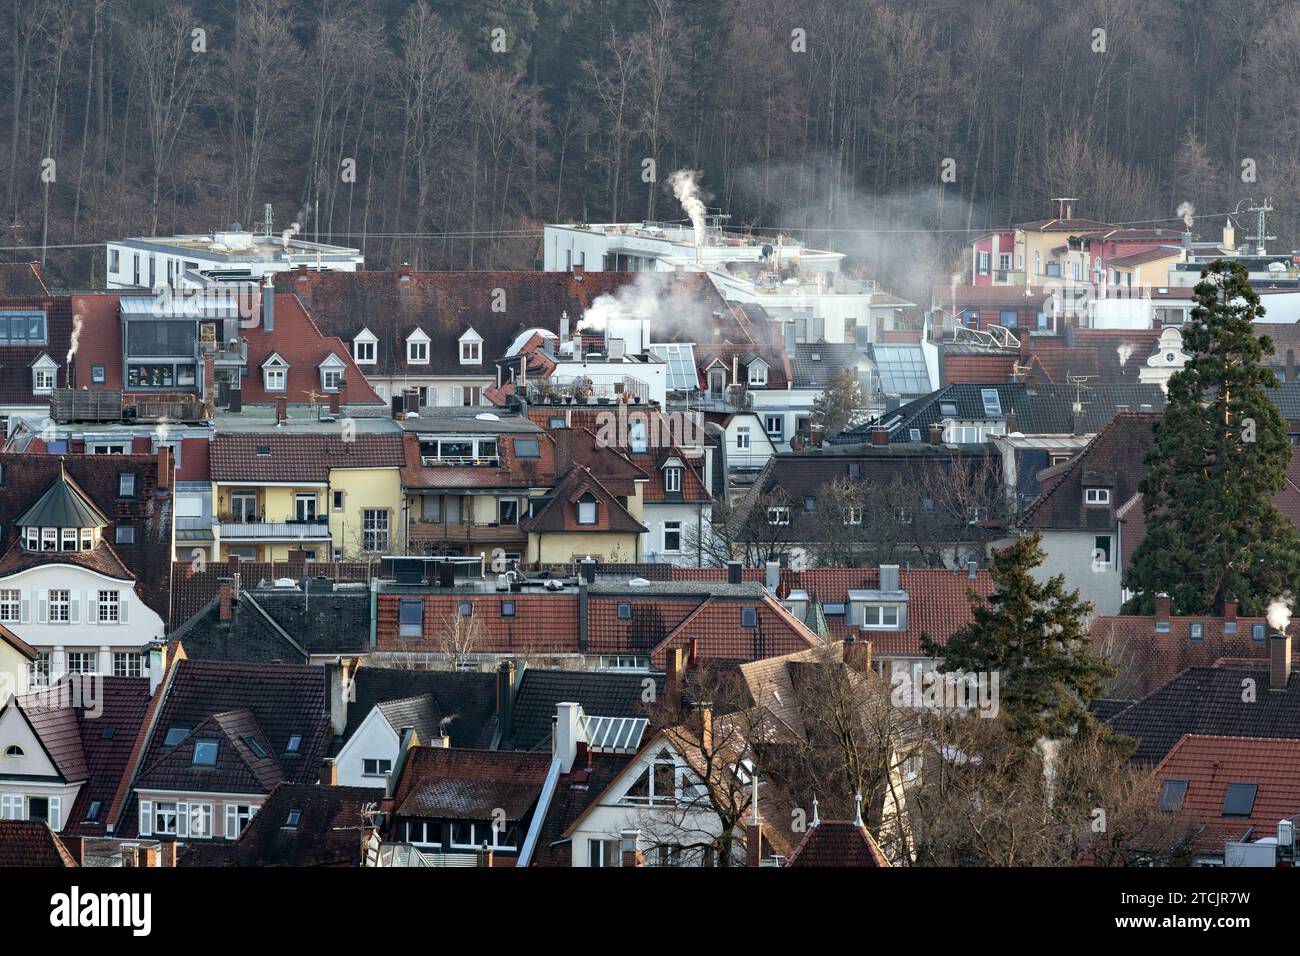 Roof landscape in Freiburg with smoking chimneys Stock Photo